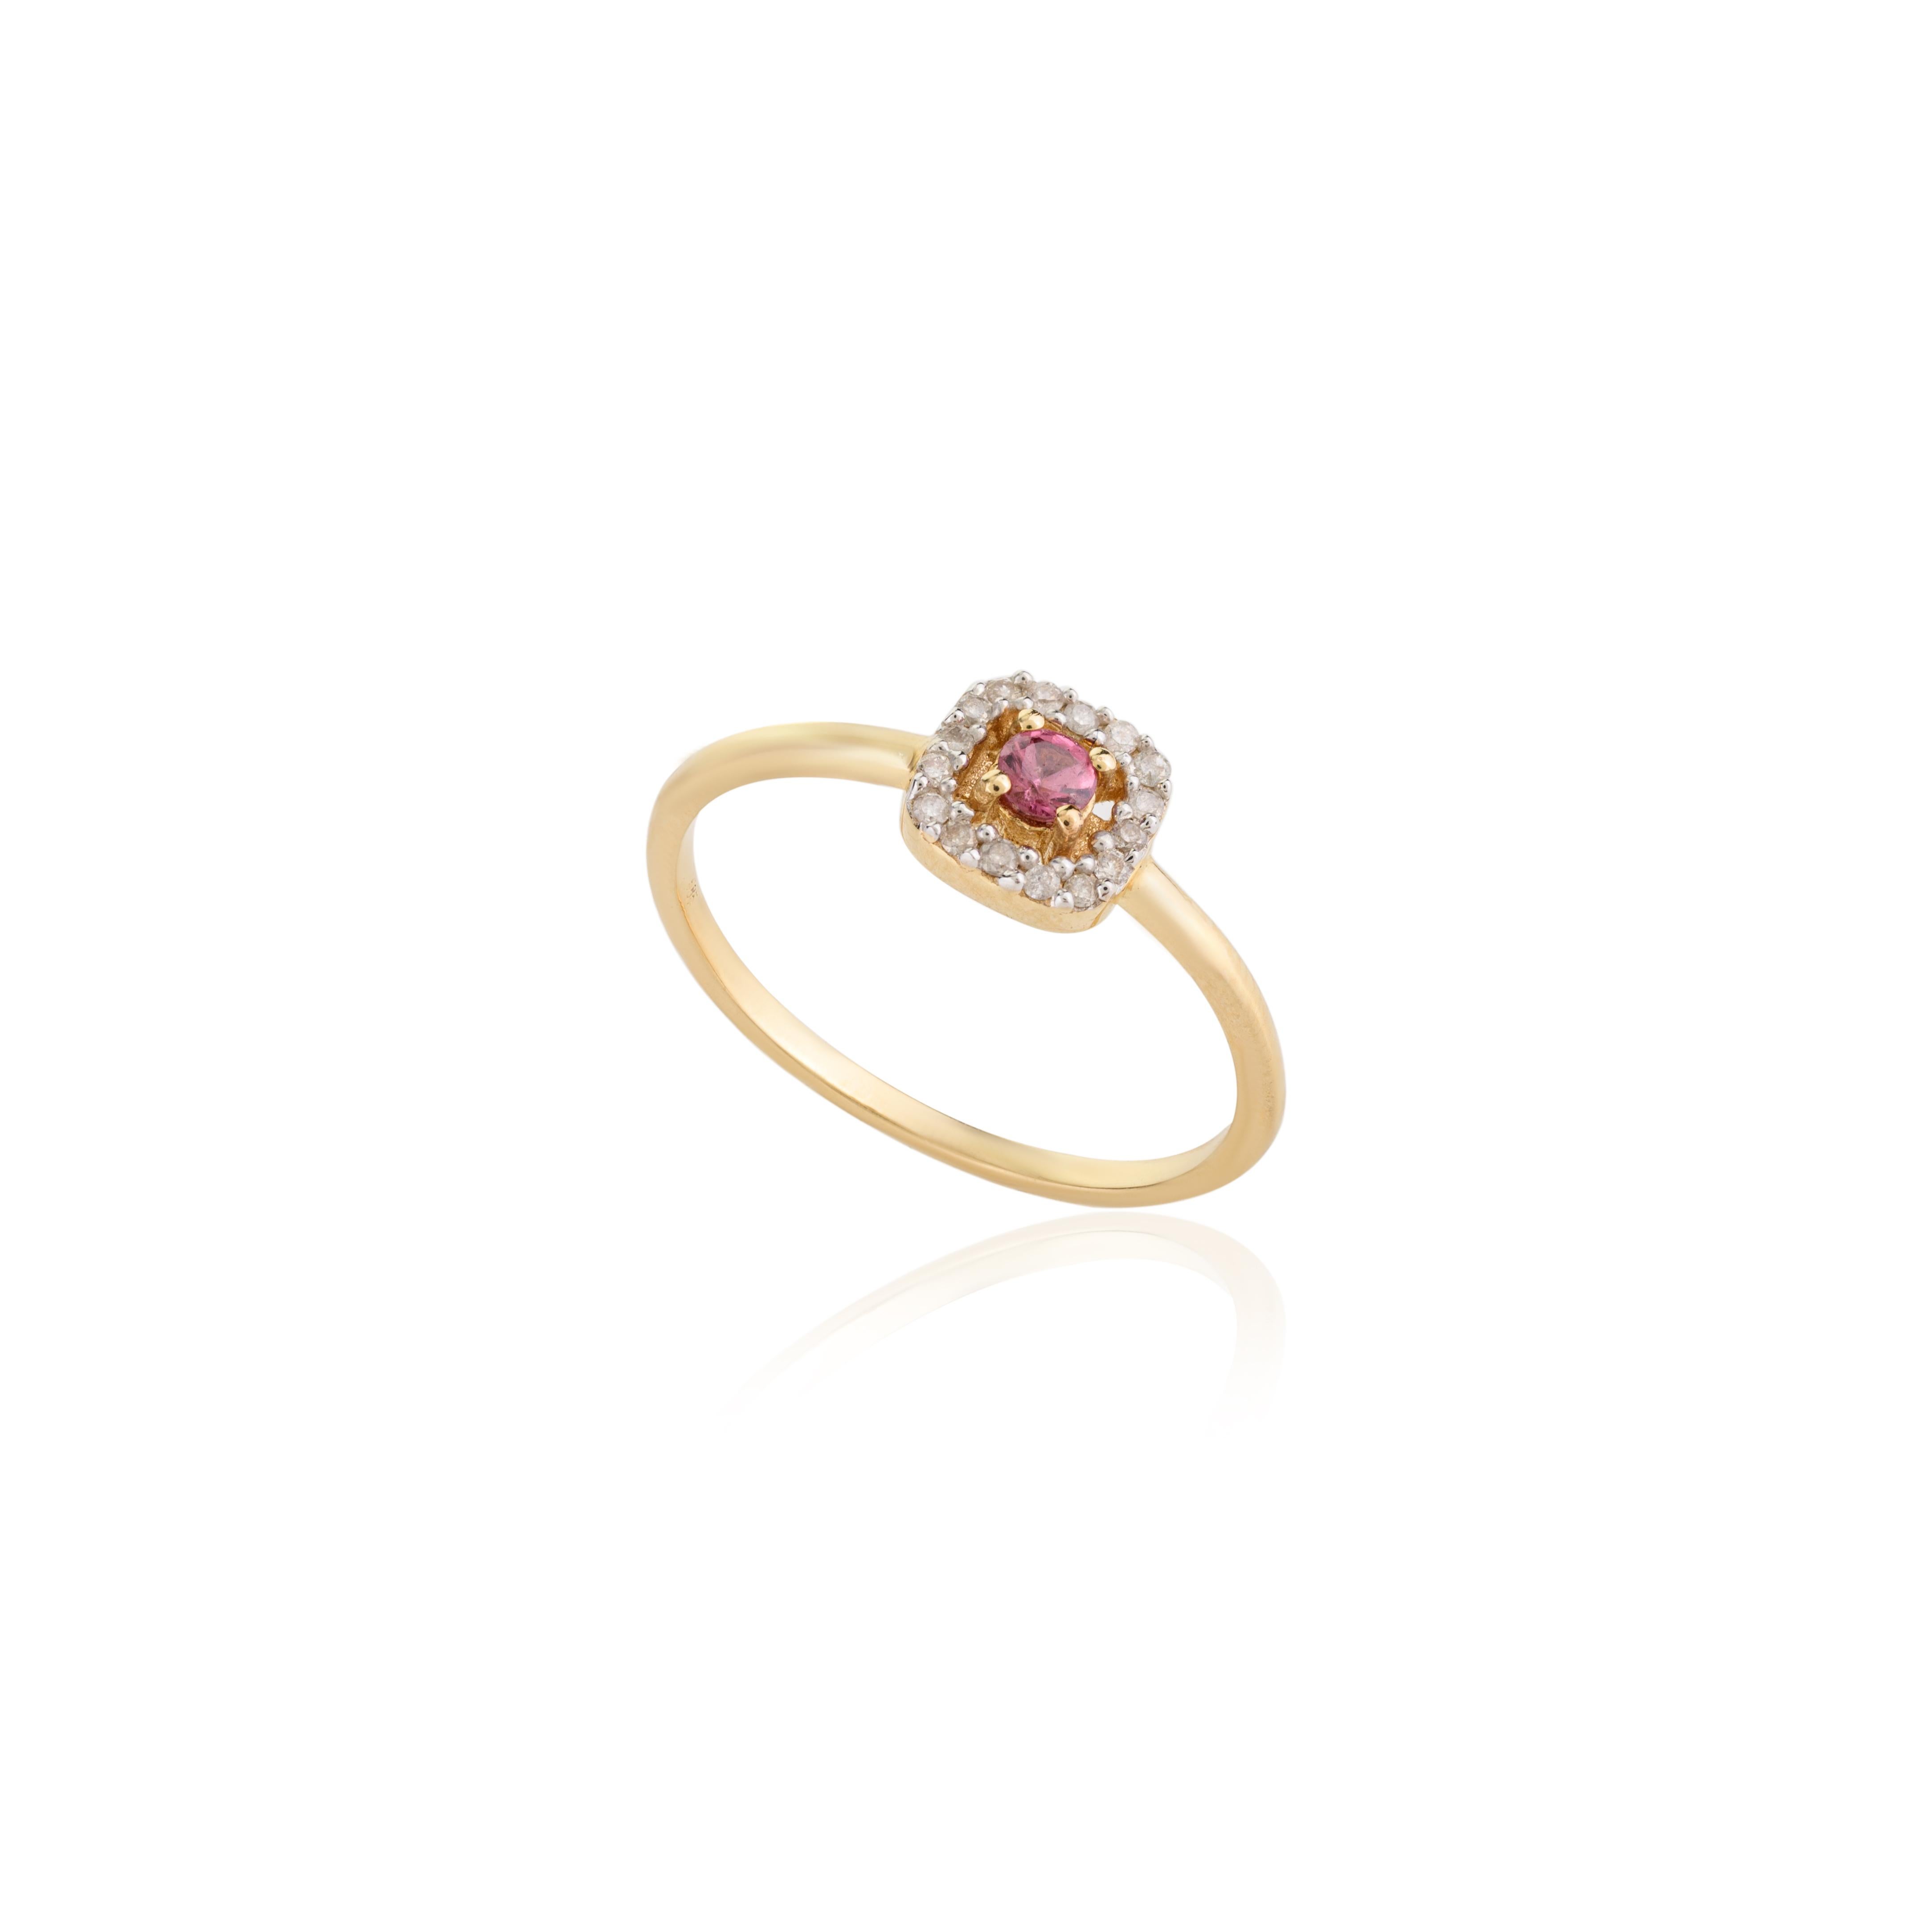 For Sale:  Dainty Pink Sapphire and Halo Diamond Ring Made in 14k Solid Yellow Gold 4